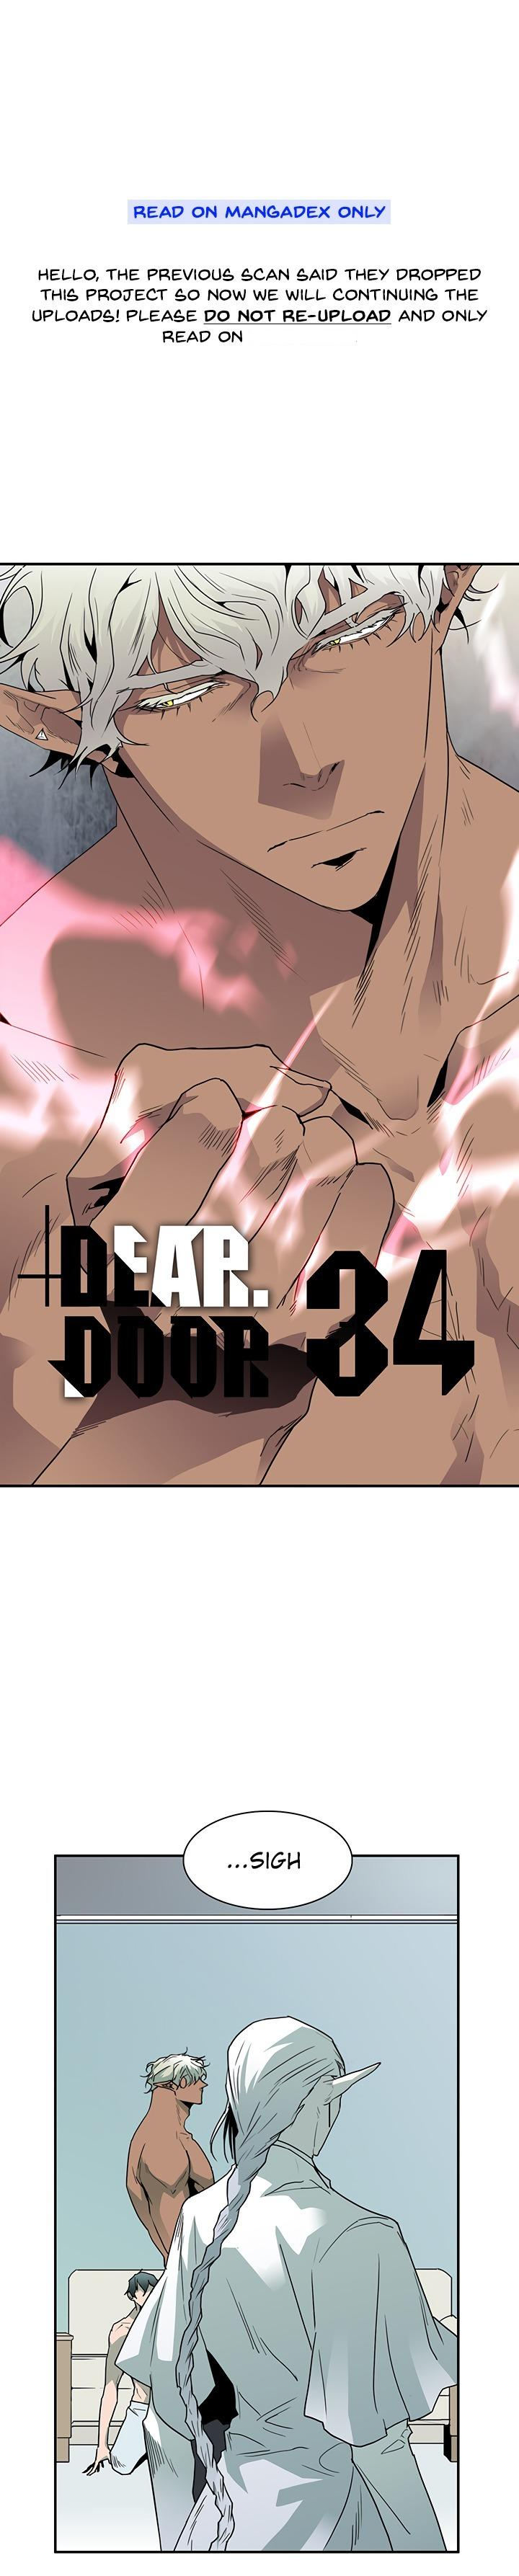 Dear Door Chapter 34 - Page 1